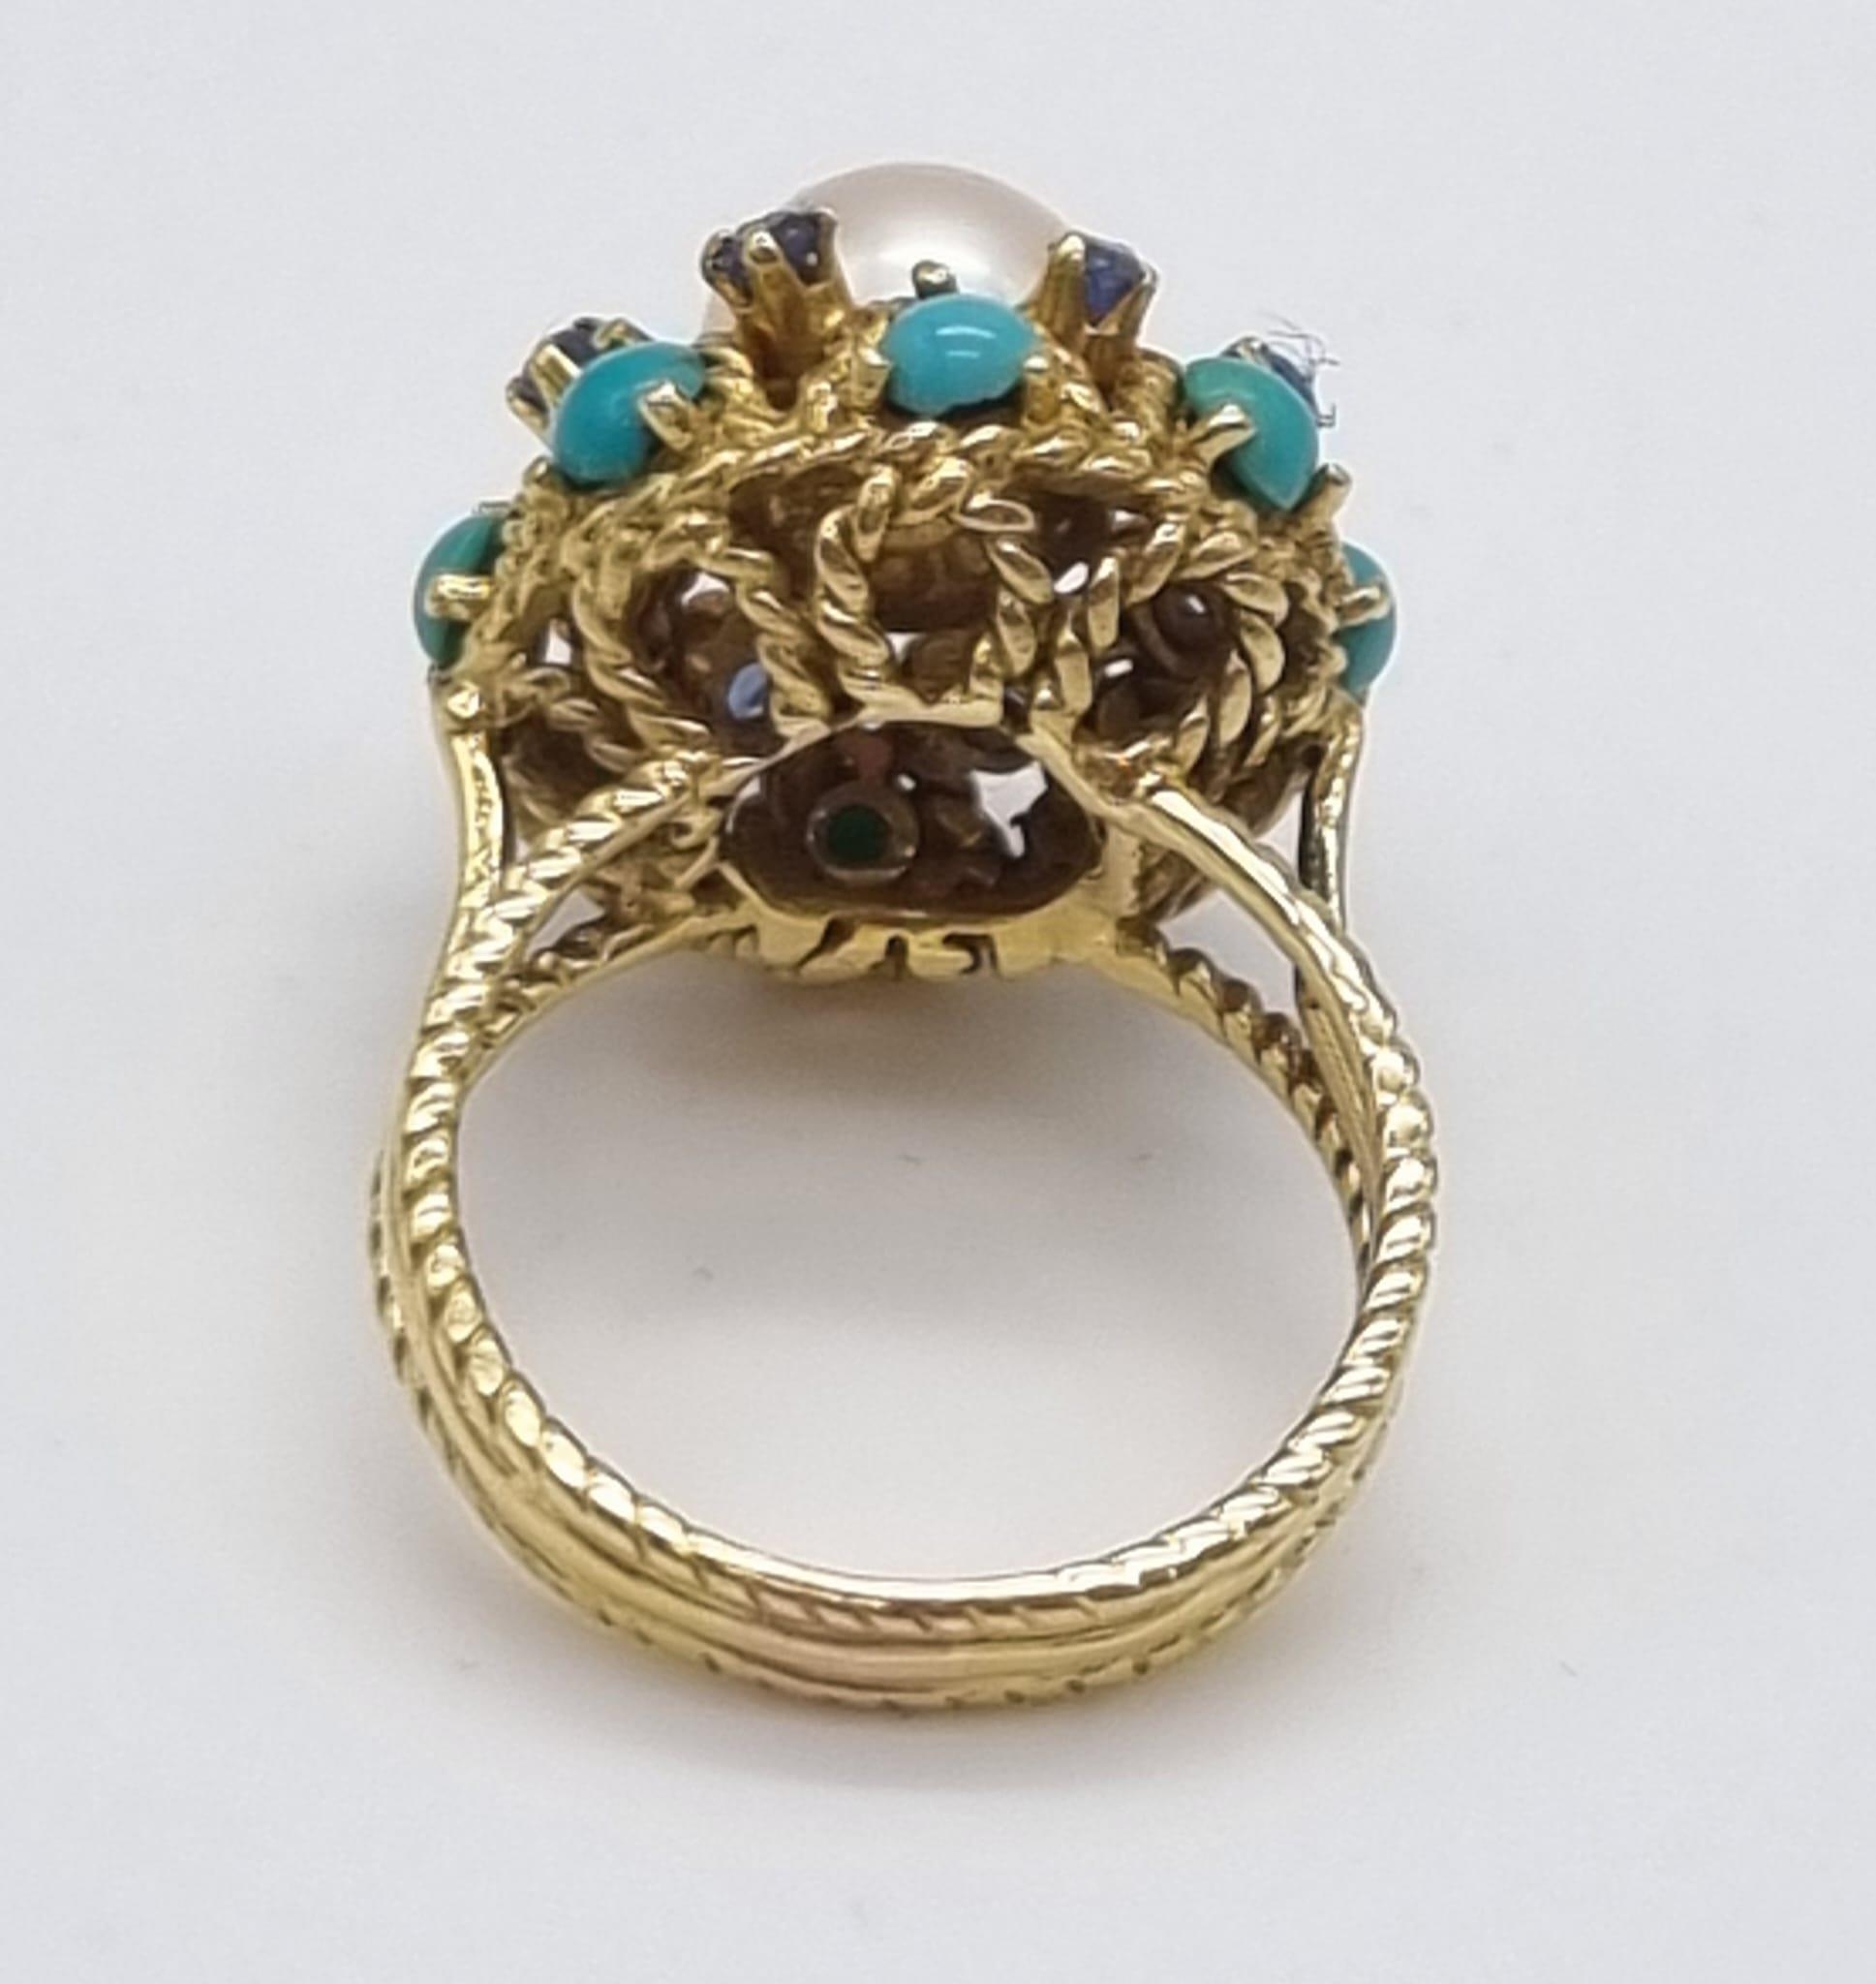 A Wonderful Vintage Possibly Antique 18K Yellow Gold, Turquoise and Pearl Ring/Brooch Set. Ring - - Image 6 of 13